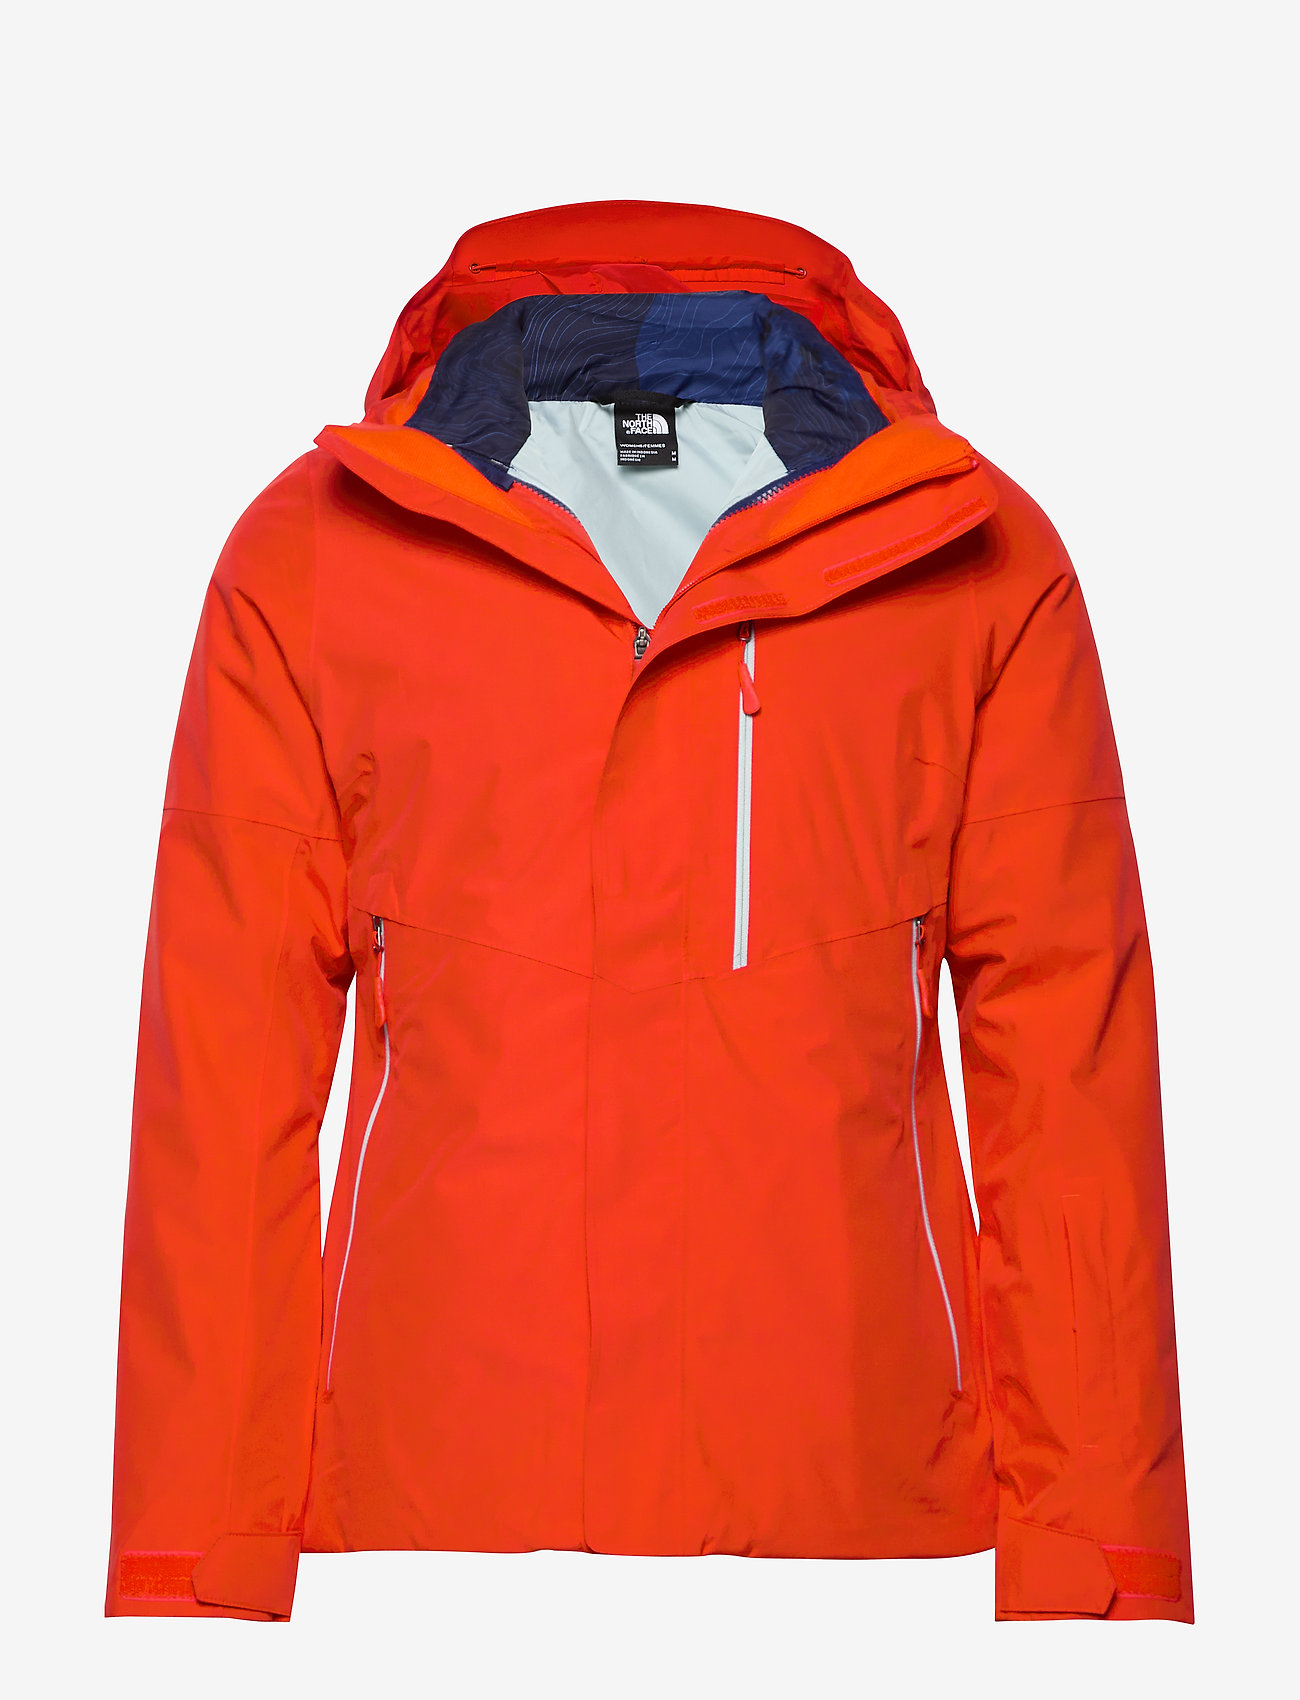 the north face women's garner triclimate jacket